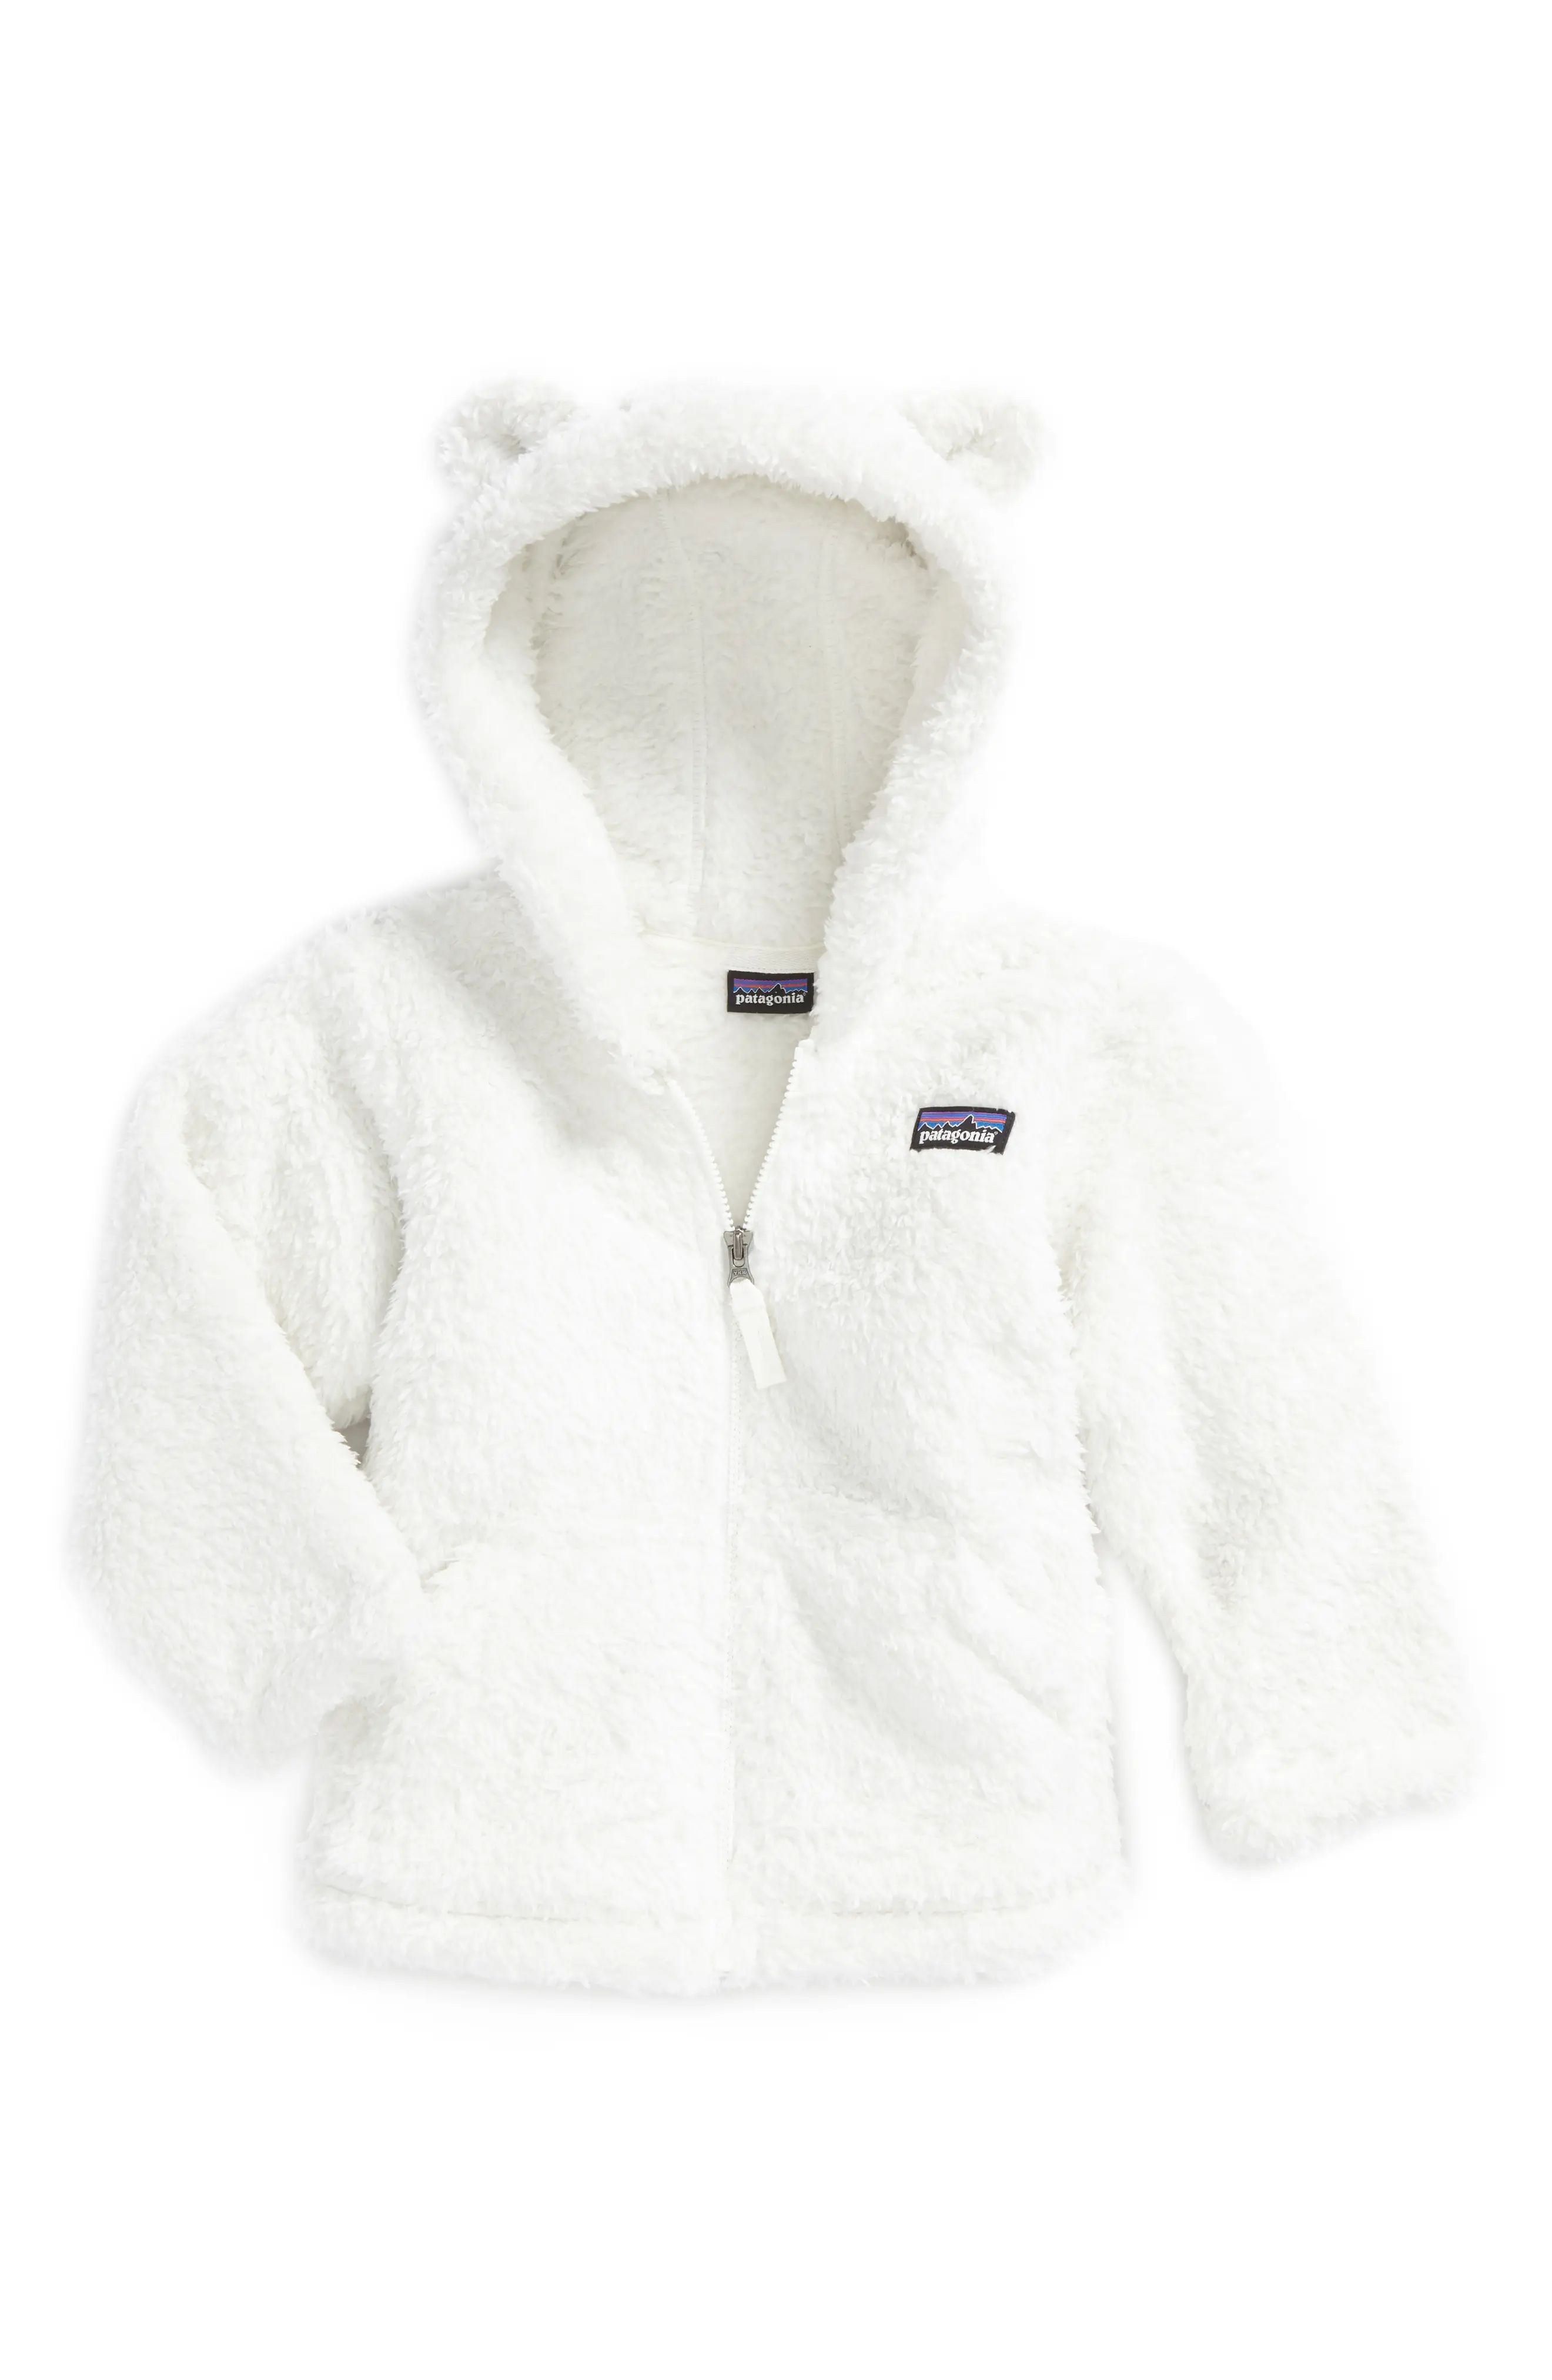 Toddler Girl's Patagonia Furry Friends Fleece Hoodie, Size 2T - White | Nordstrom